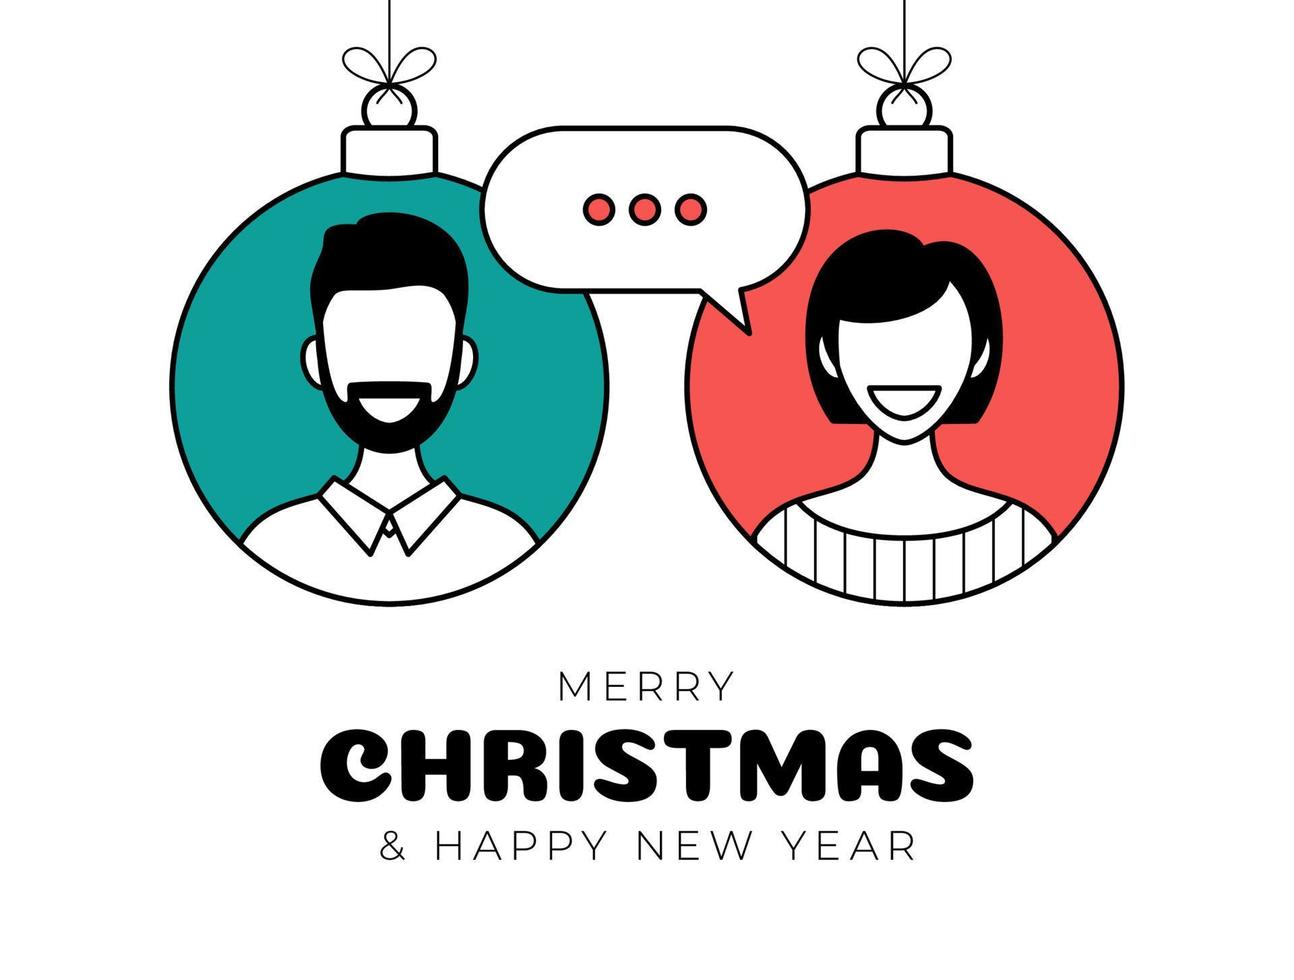 christmas chatting with woman and man vector illustration. Online chat between a guy and a girl. Man and woman icons in flat style on xmas ball . Chat messaging communication